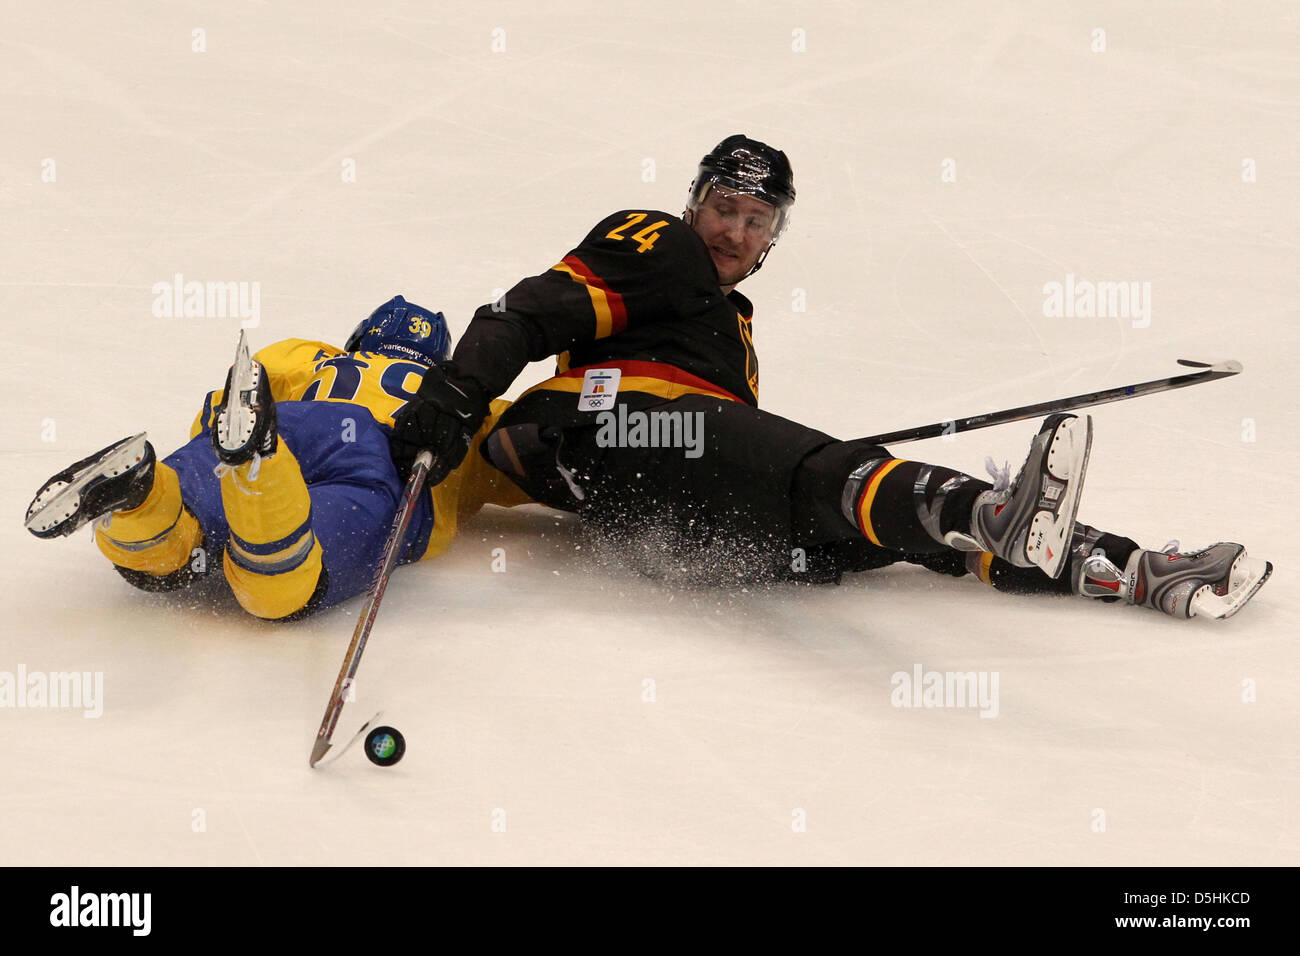 Sweden player Tobias Enstrom (L) falls while going for the puck against Andre Rankel of Germany during the Ice Hockey preliminary round at Canada Hockey Place during the Vancouver 2010 Olympic Games, in Vancouver, Canada, 17 February 2010. Sweden won 2-0. Photo: Daniel Karmann  +++(c) dpa - Bildfunk+++ Stock Photo